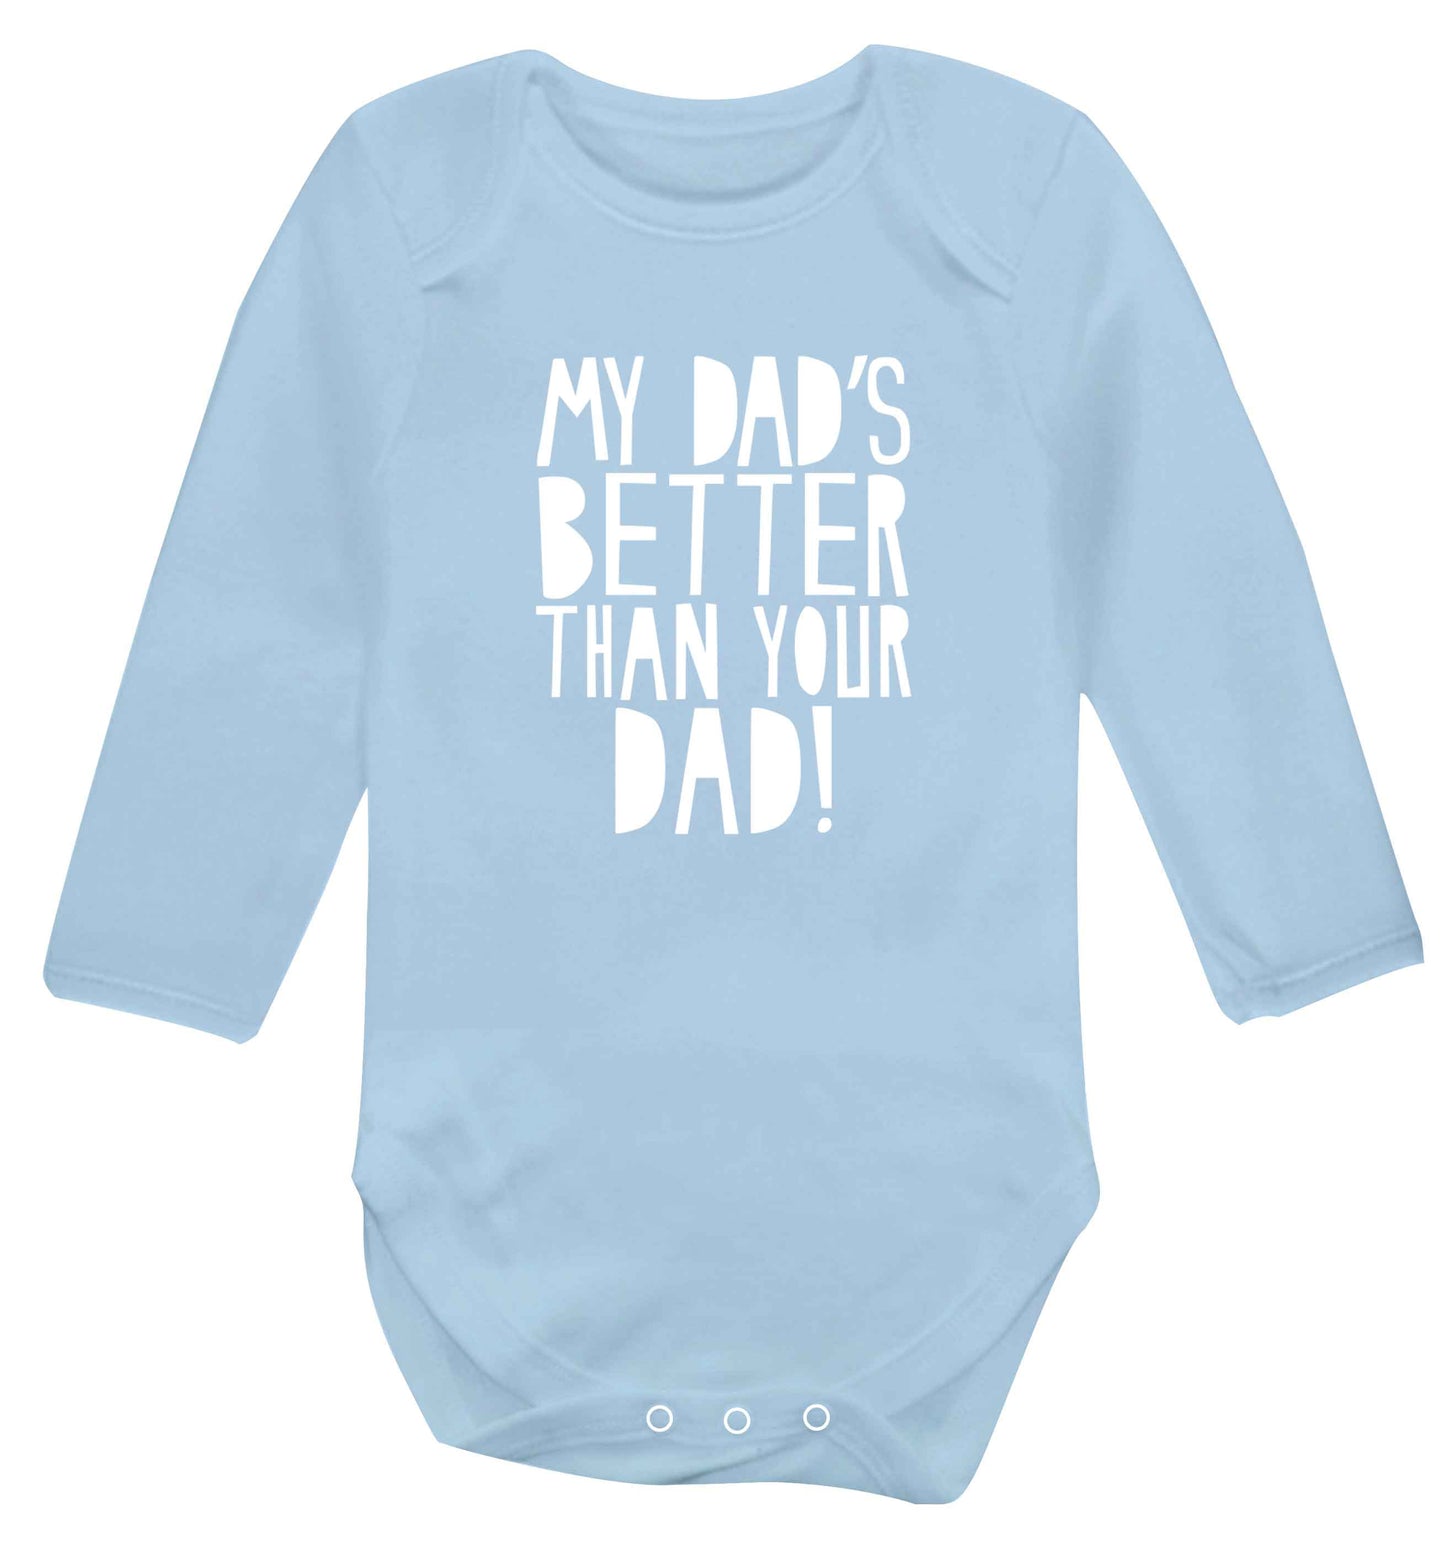 My dad's better than your dad! baby vest long sleeved pale blue 6-12 months